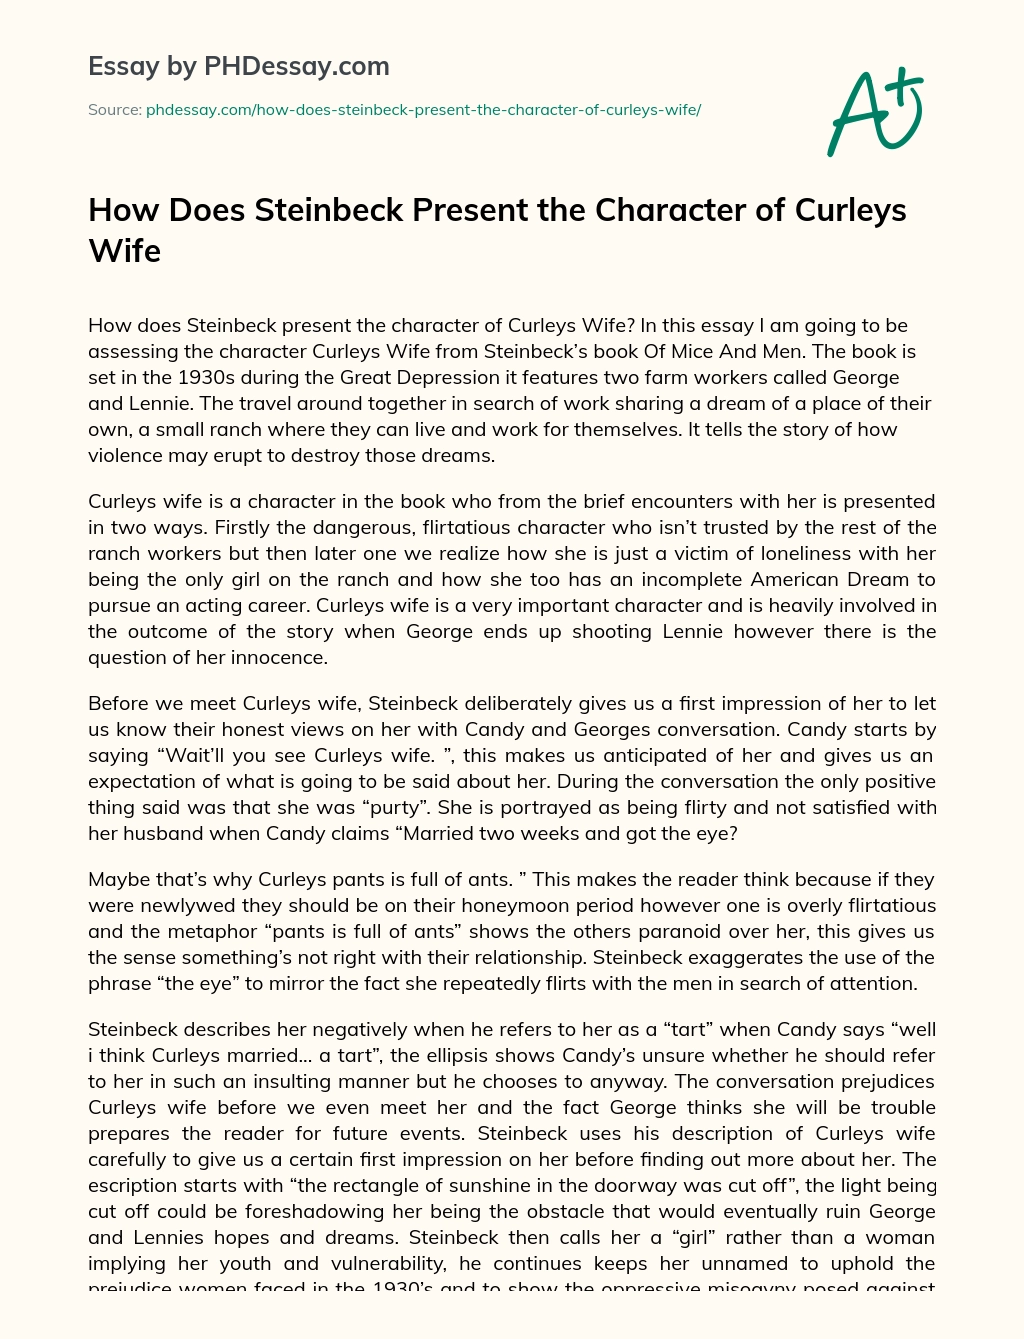 How Does Steinbeck Present the Character of Curleys Wife essay